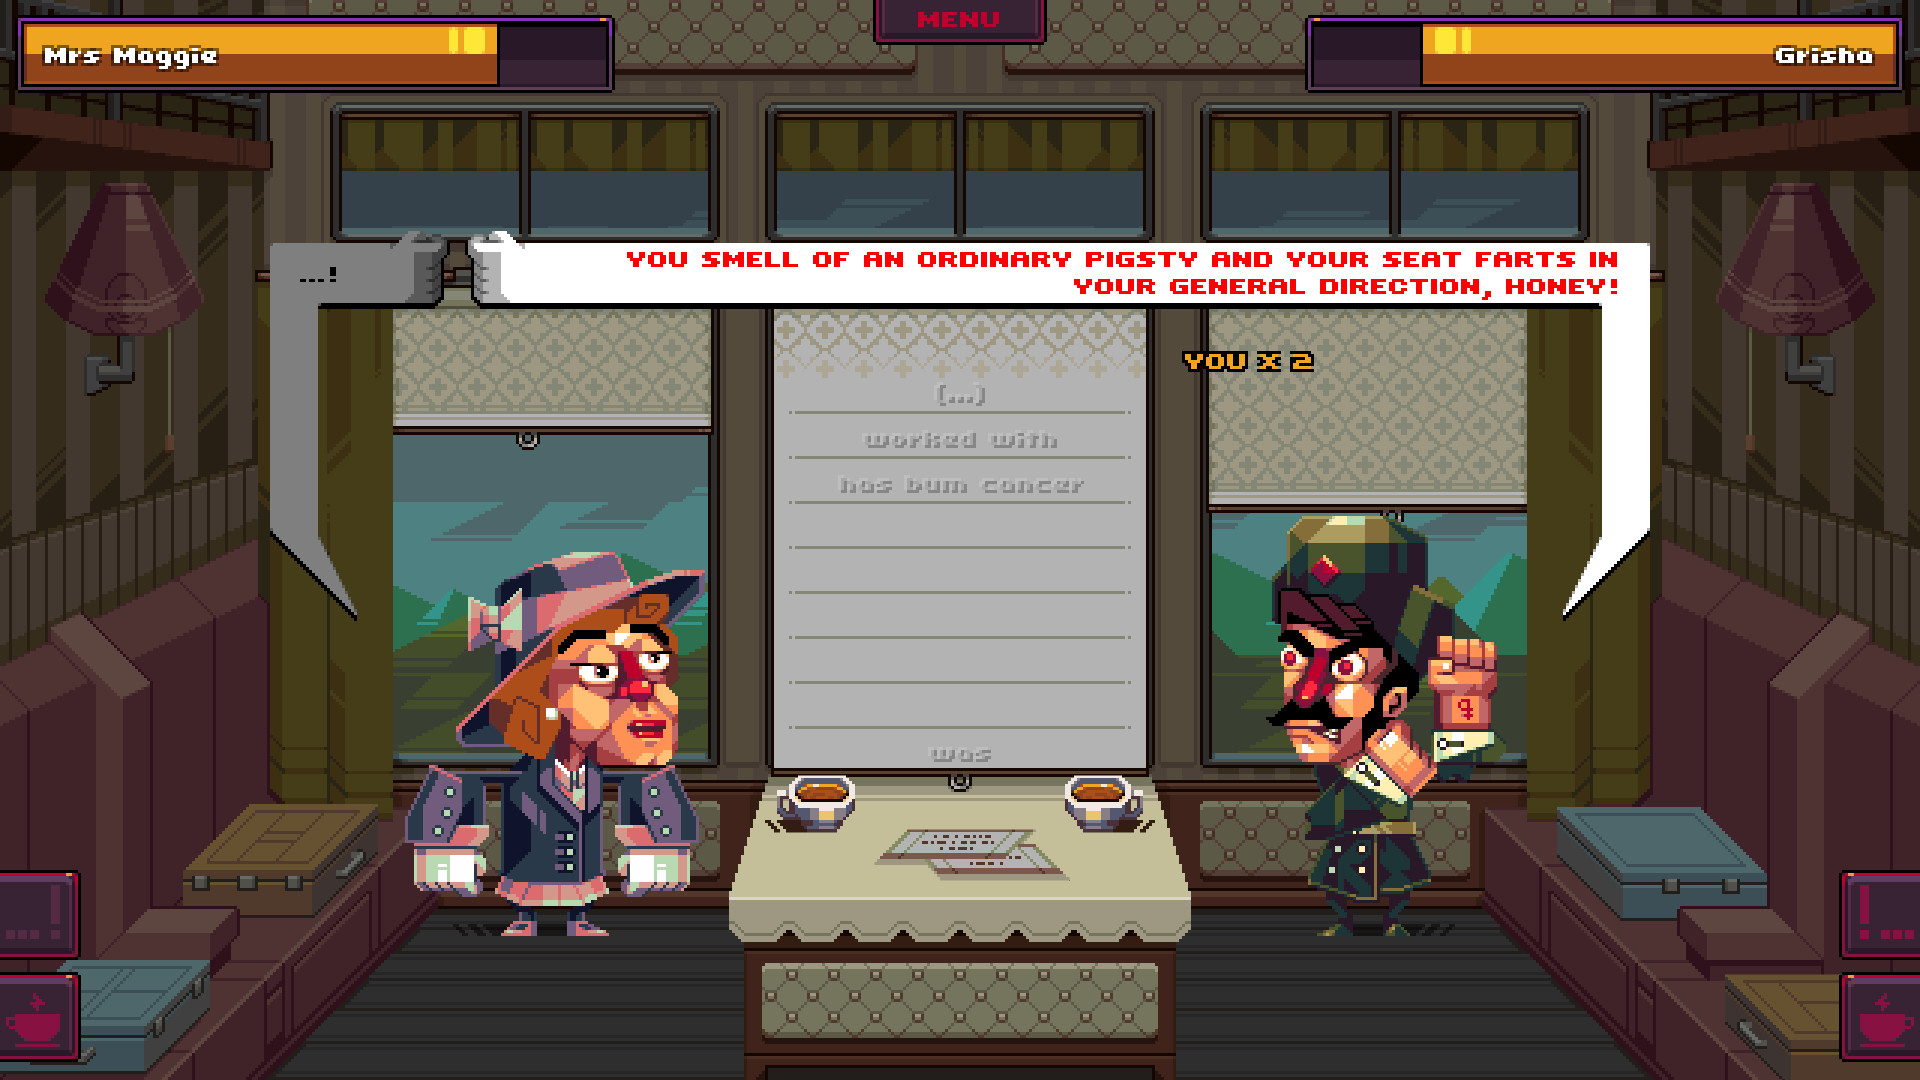 Oh...Sir!! The Insult Simulator Free Download